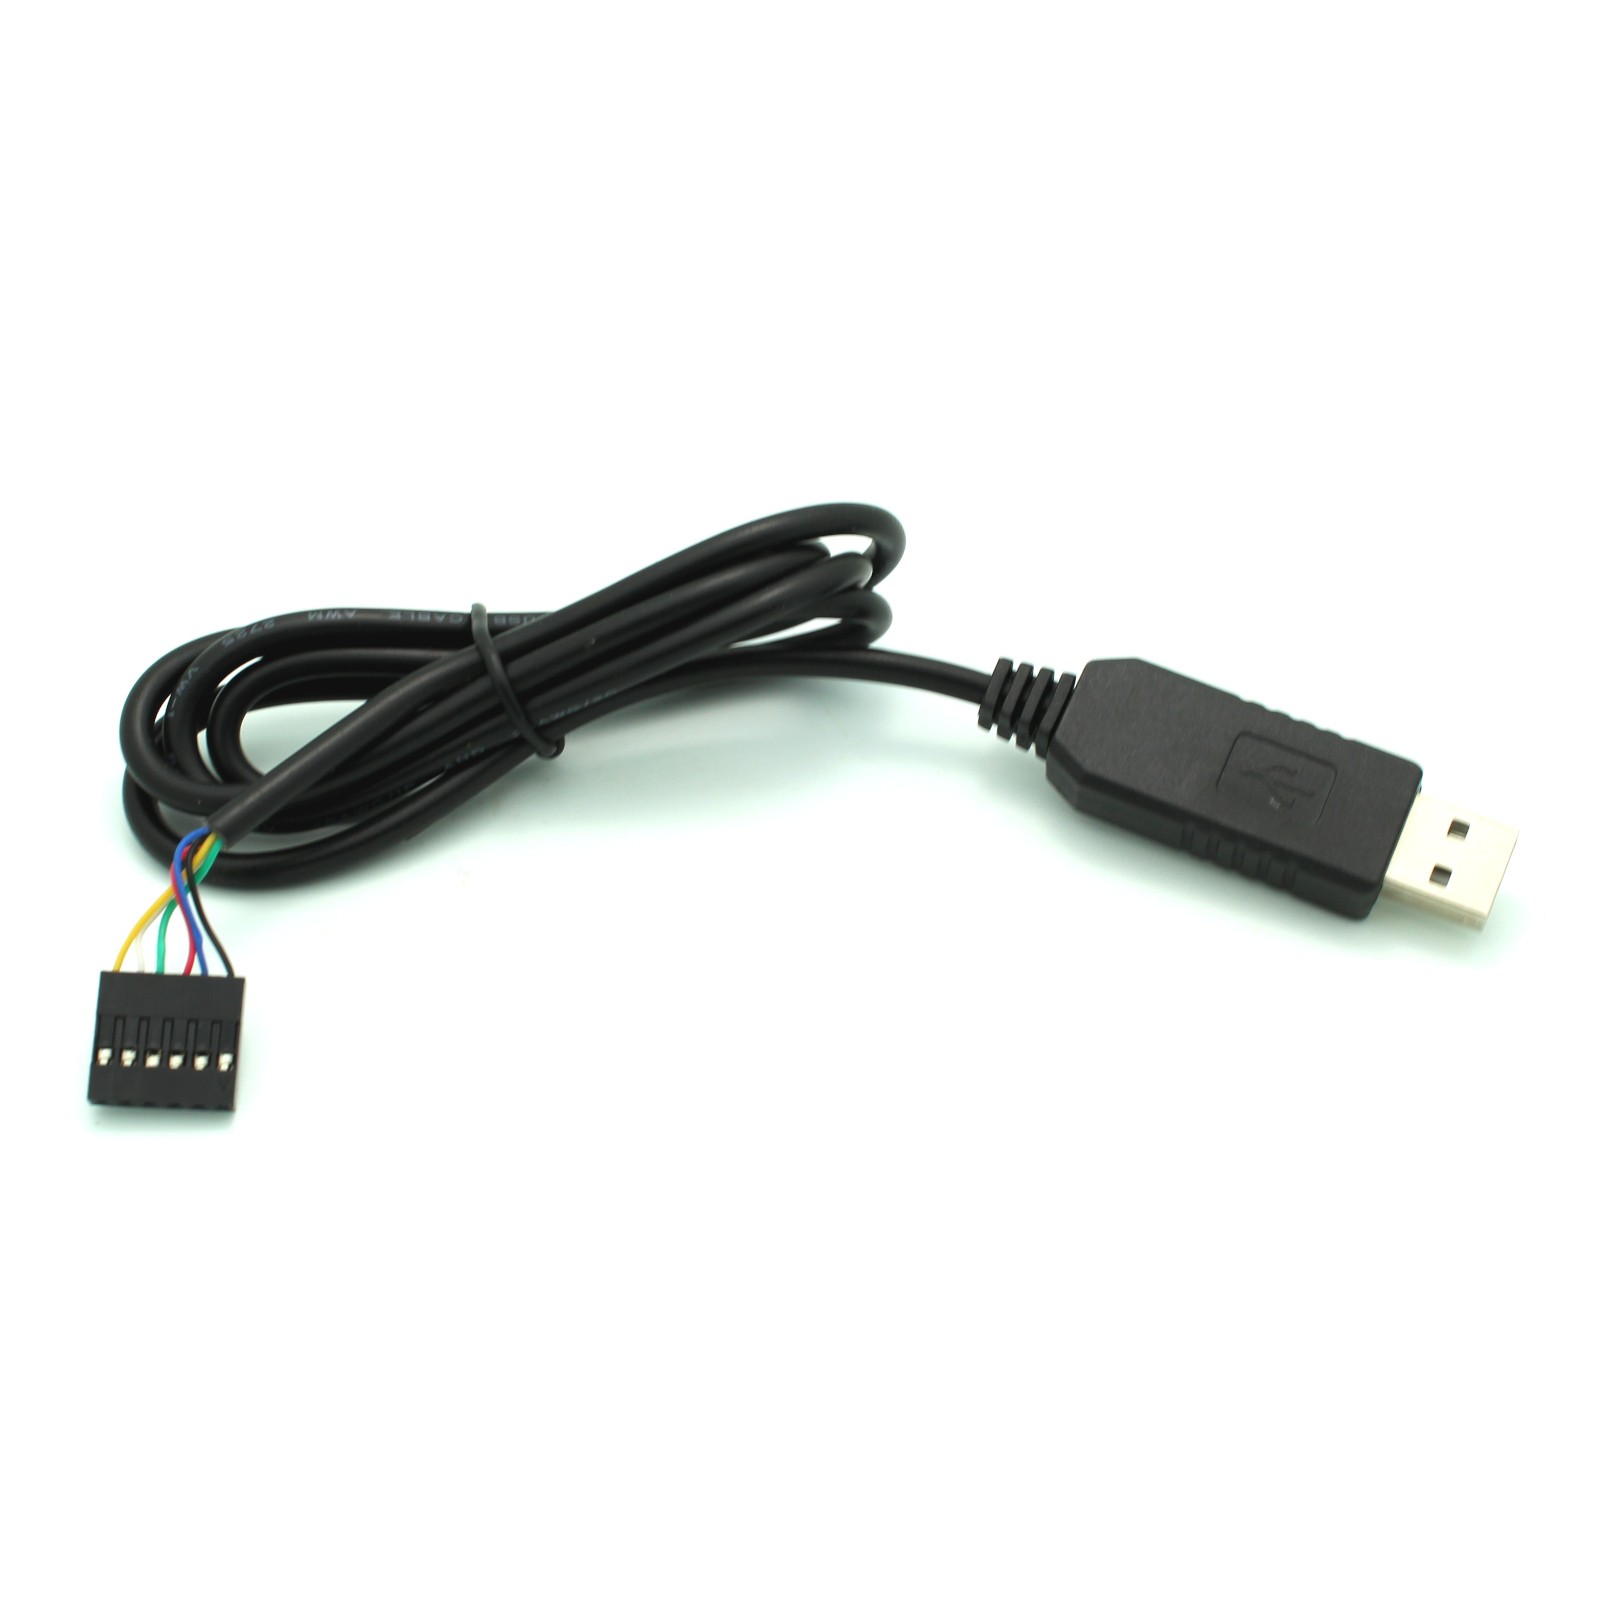 2x USB 2.0 Male Plug to 5.5x2.5mm Male Charger Cable DC Power Supply 2M 6.56FT 